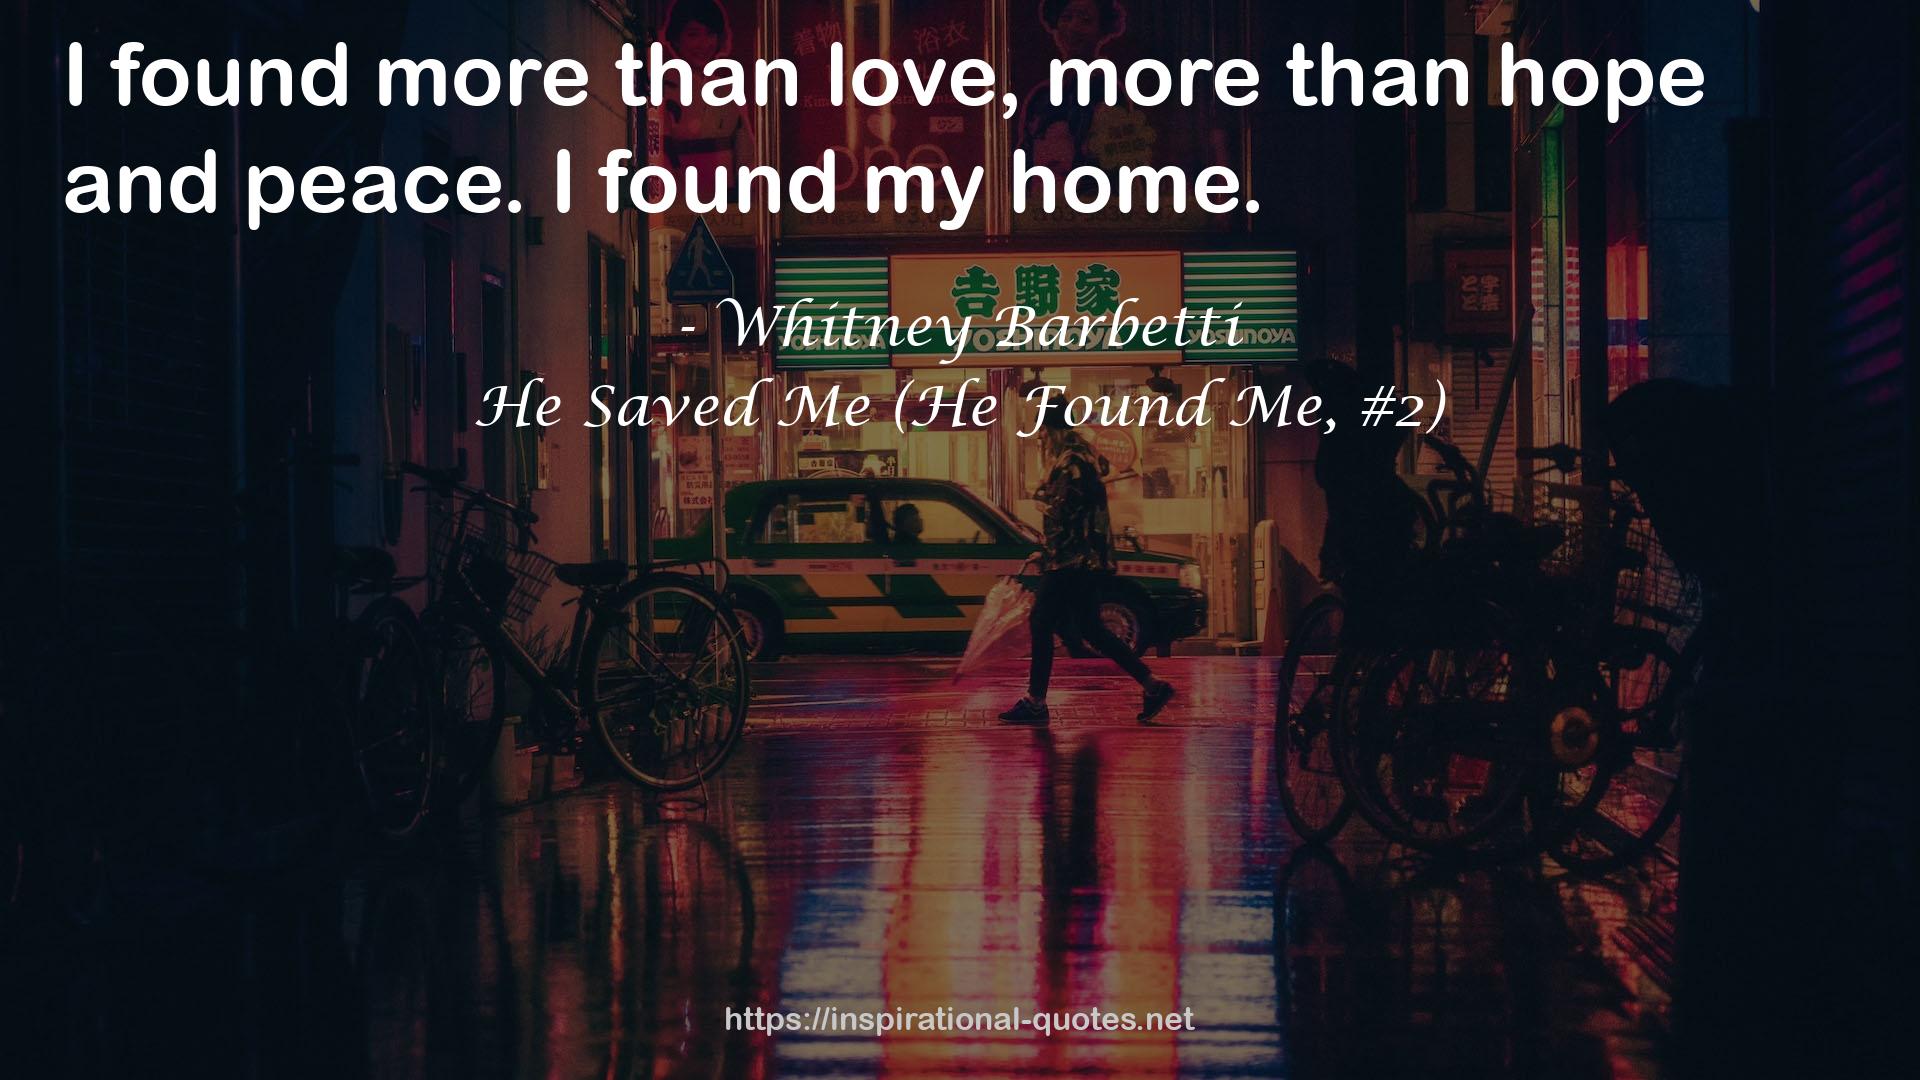 He Saved Me (He Found Me, #2) QUOTES